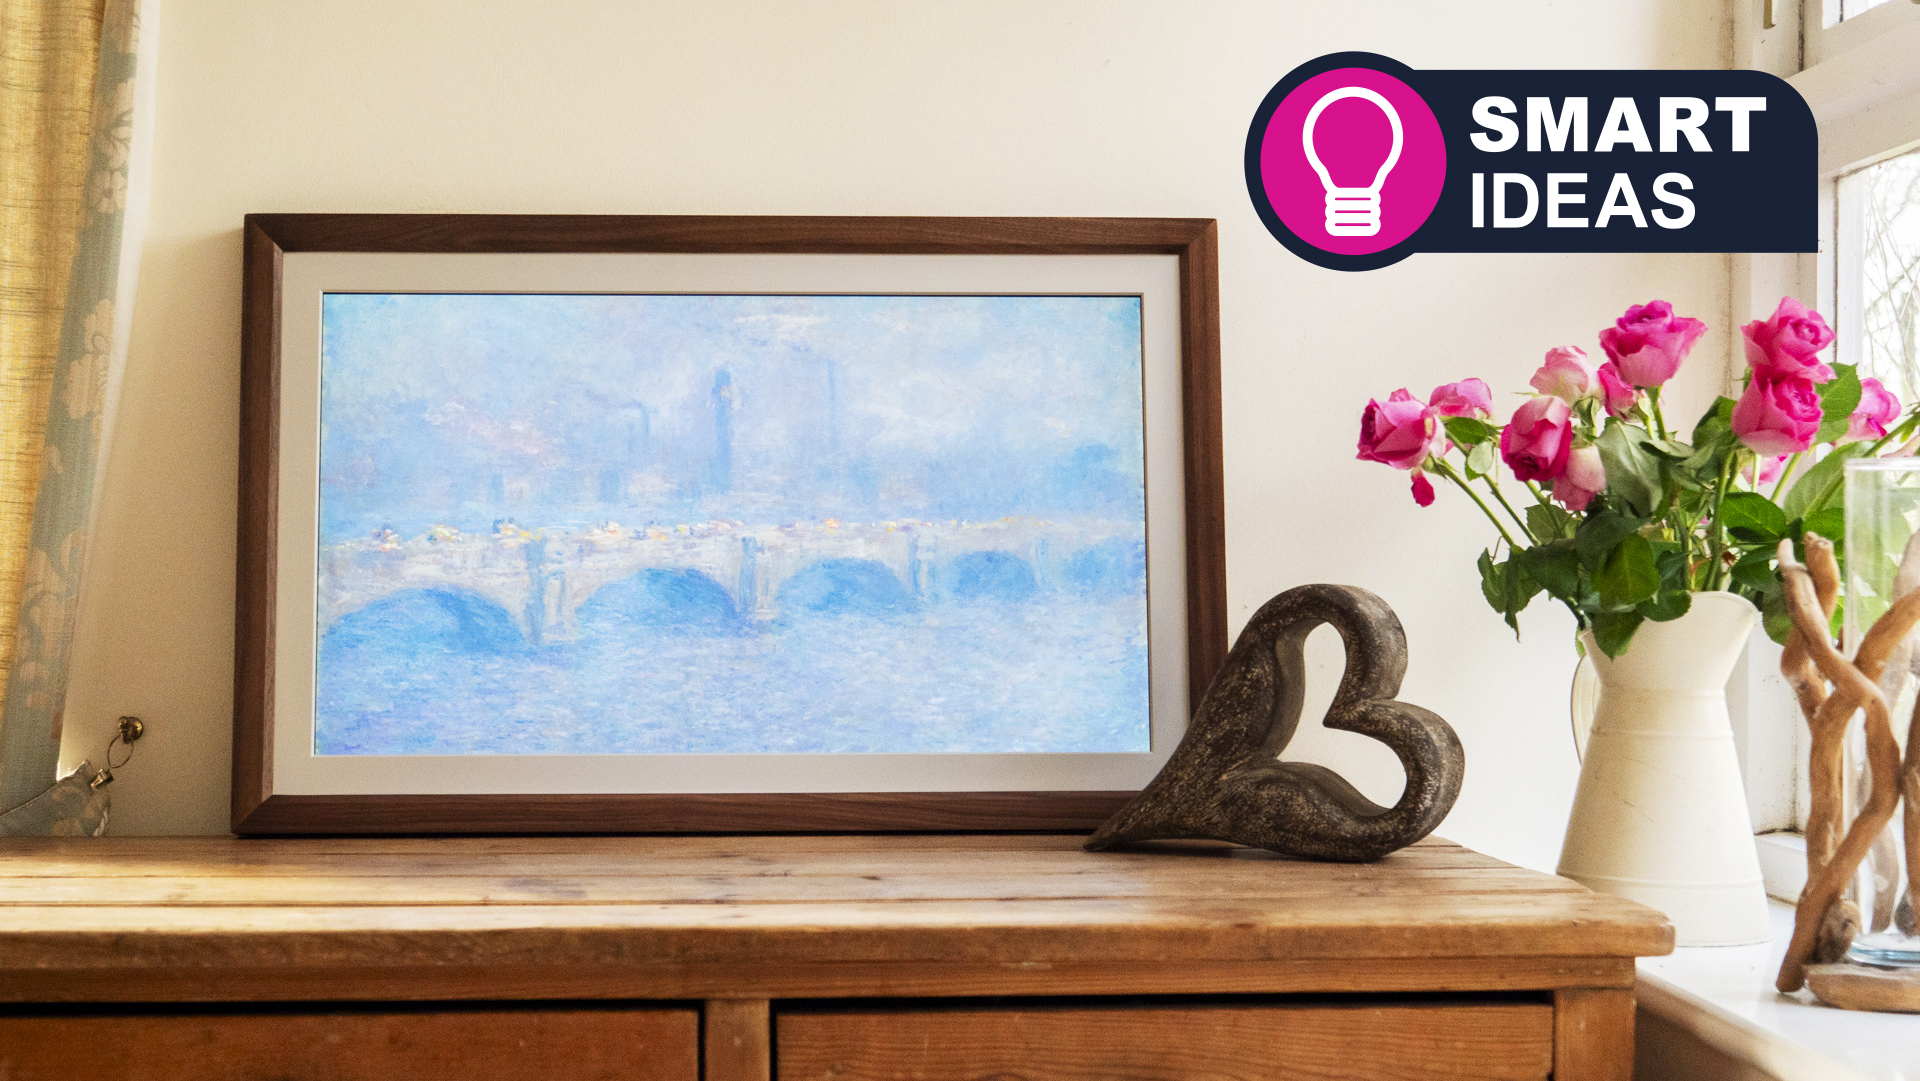 This digital frame is one of the cheapest ways to get art on your walls ...